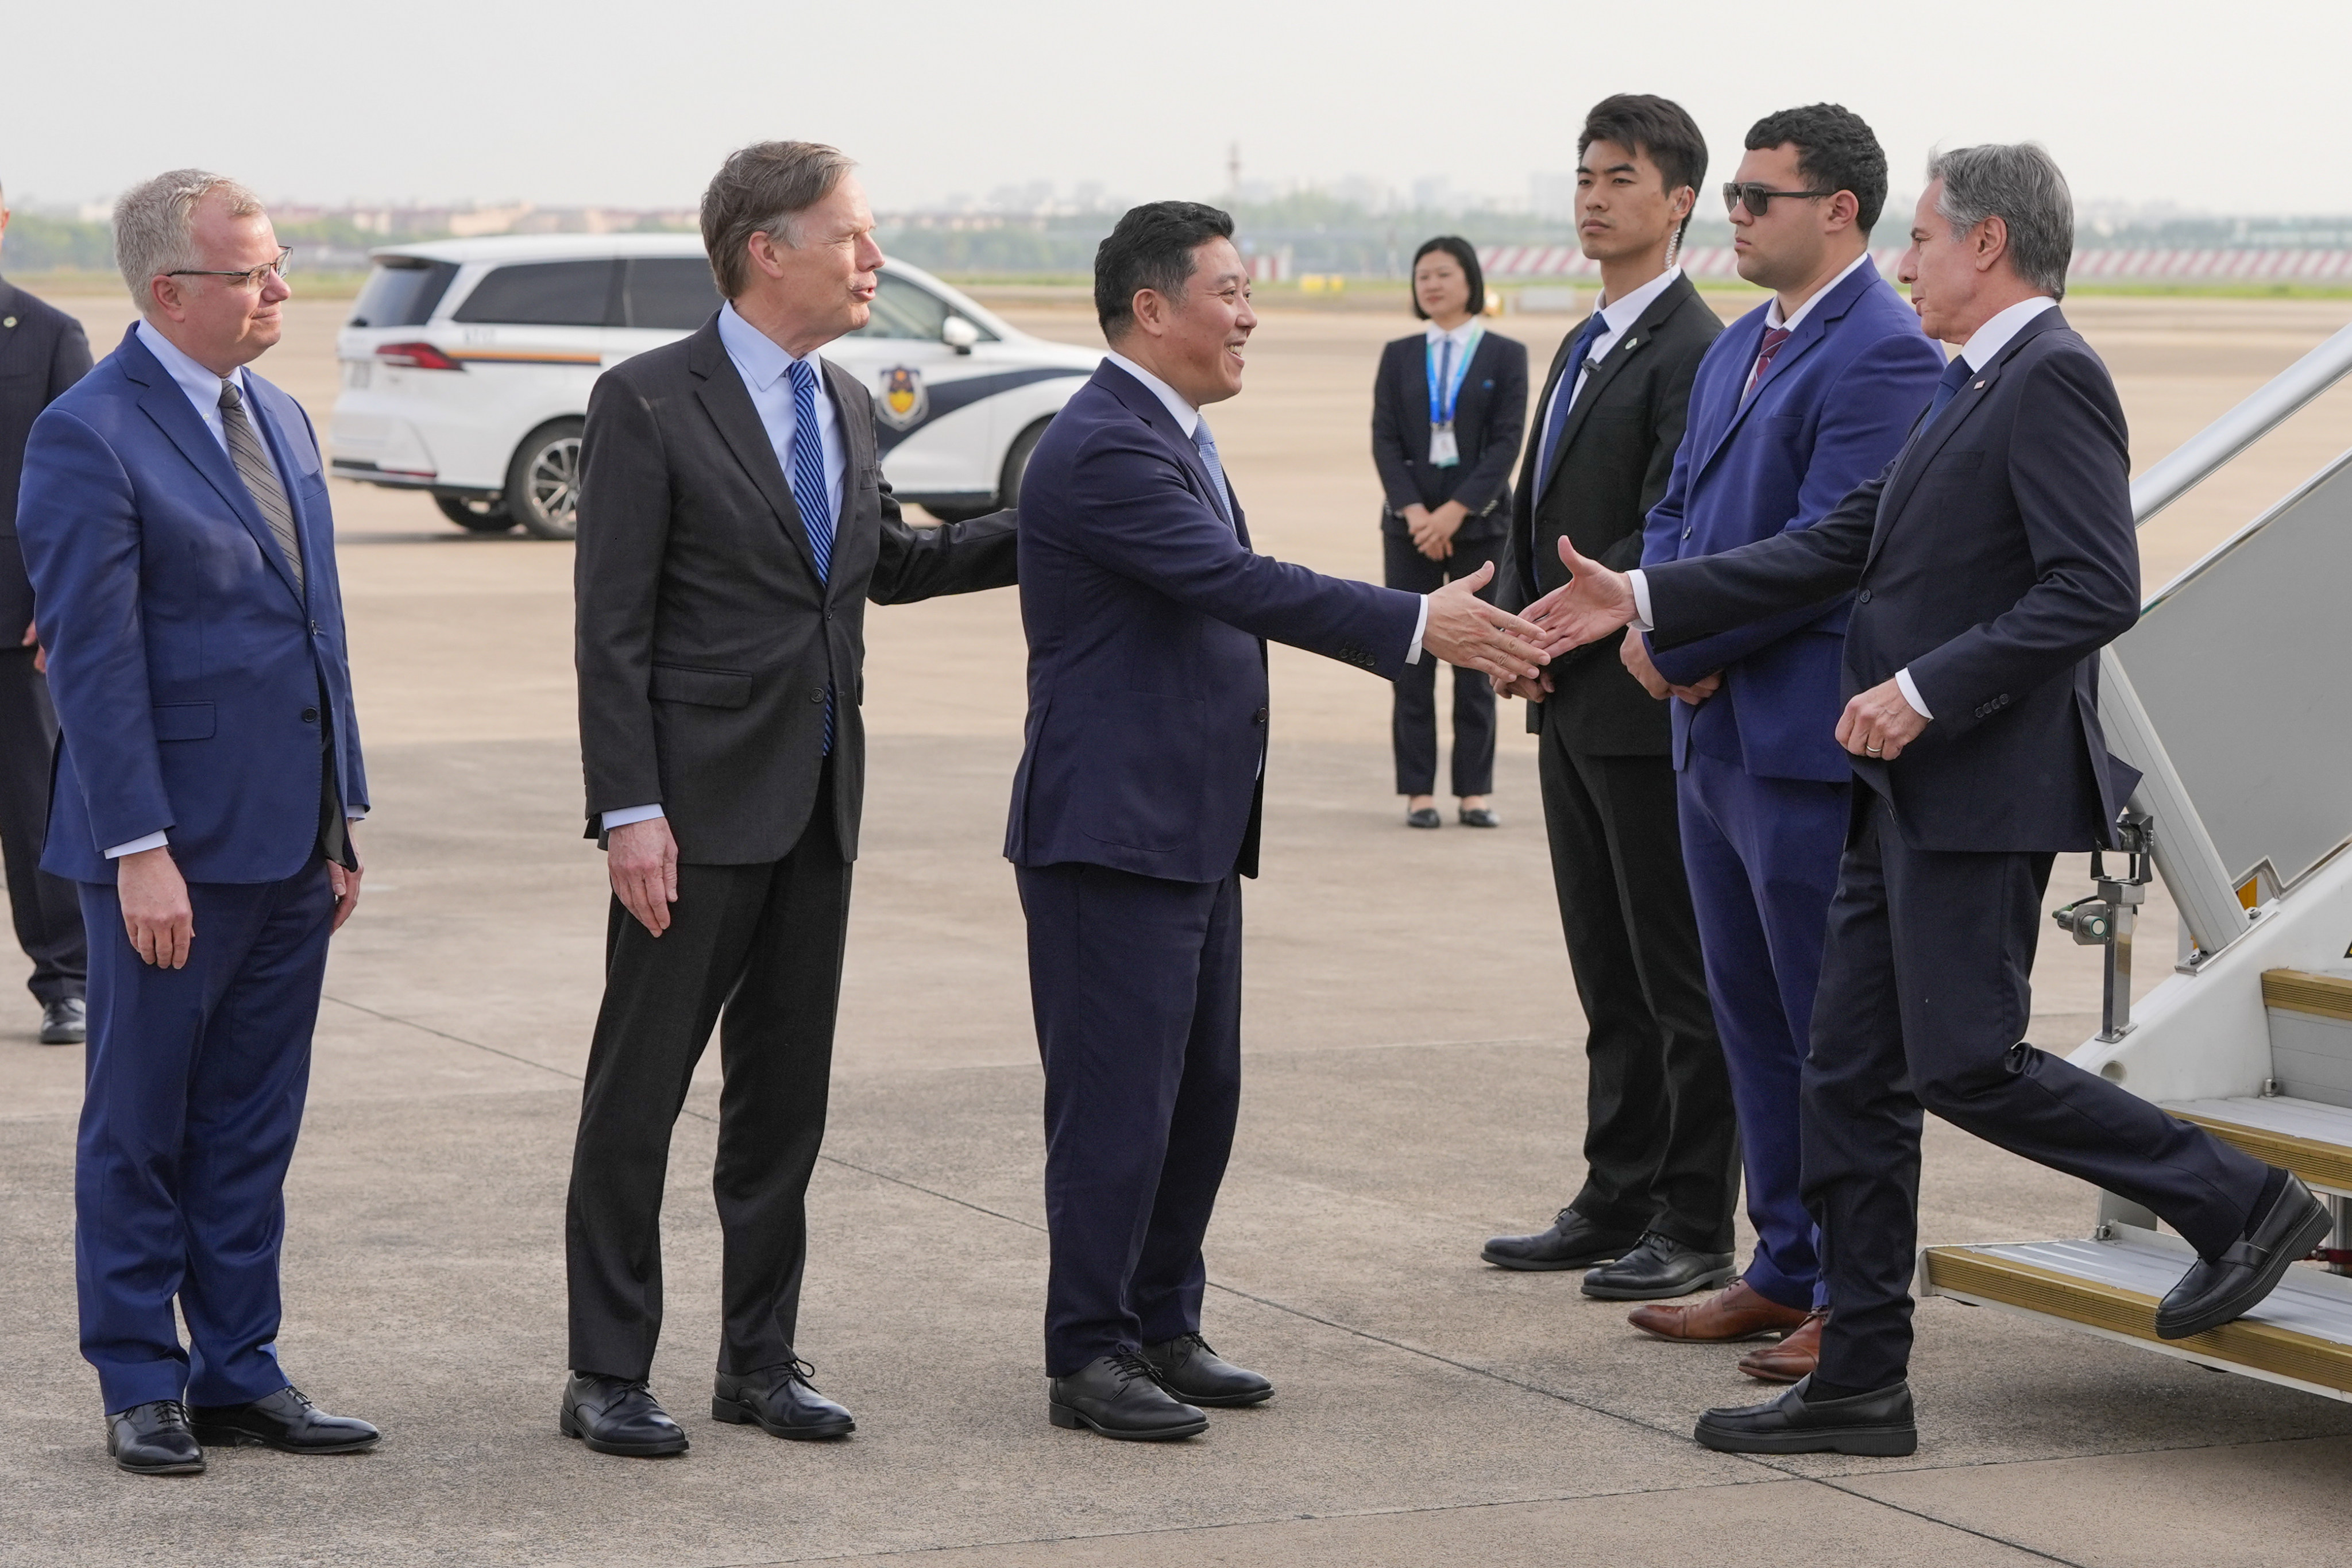 US Secretary of State Antony Blinken is greeted at the airport by Kong Fuan, director general of the Shanghai Foreign Affairs Office, as US ambassador to China   Nicholas Burns and the US consul general in Shanghai,  Scott Walker, look on, in Shanghai on April 24. Photo: AP